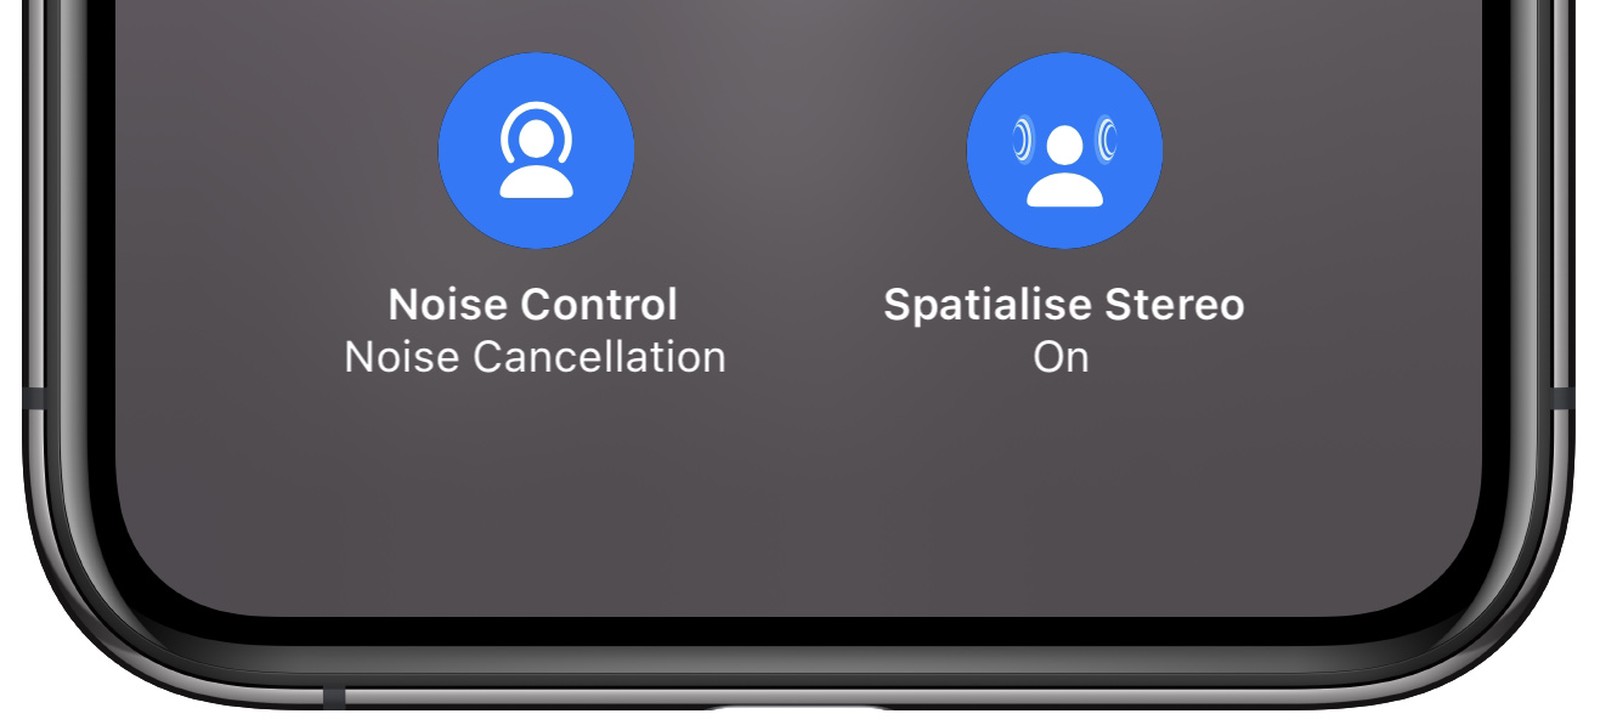 macos monterey apple spatialize stereo audio